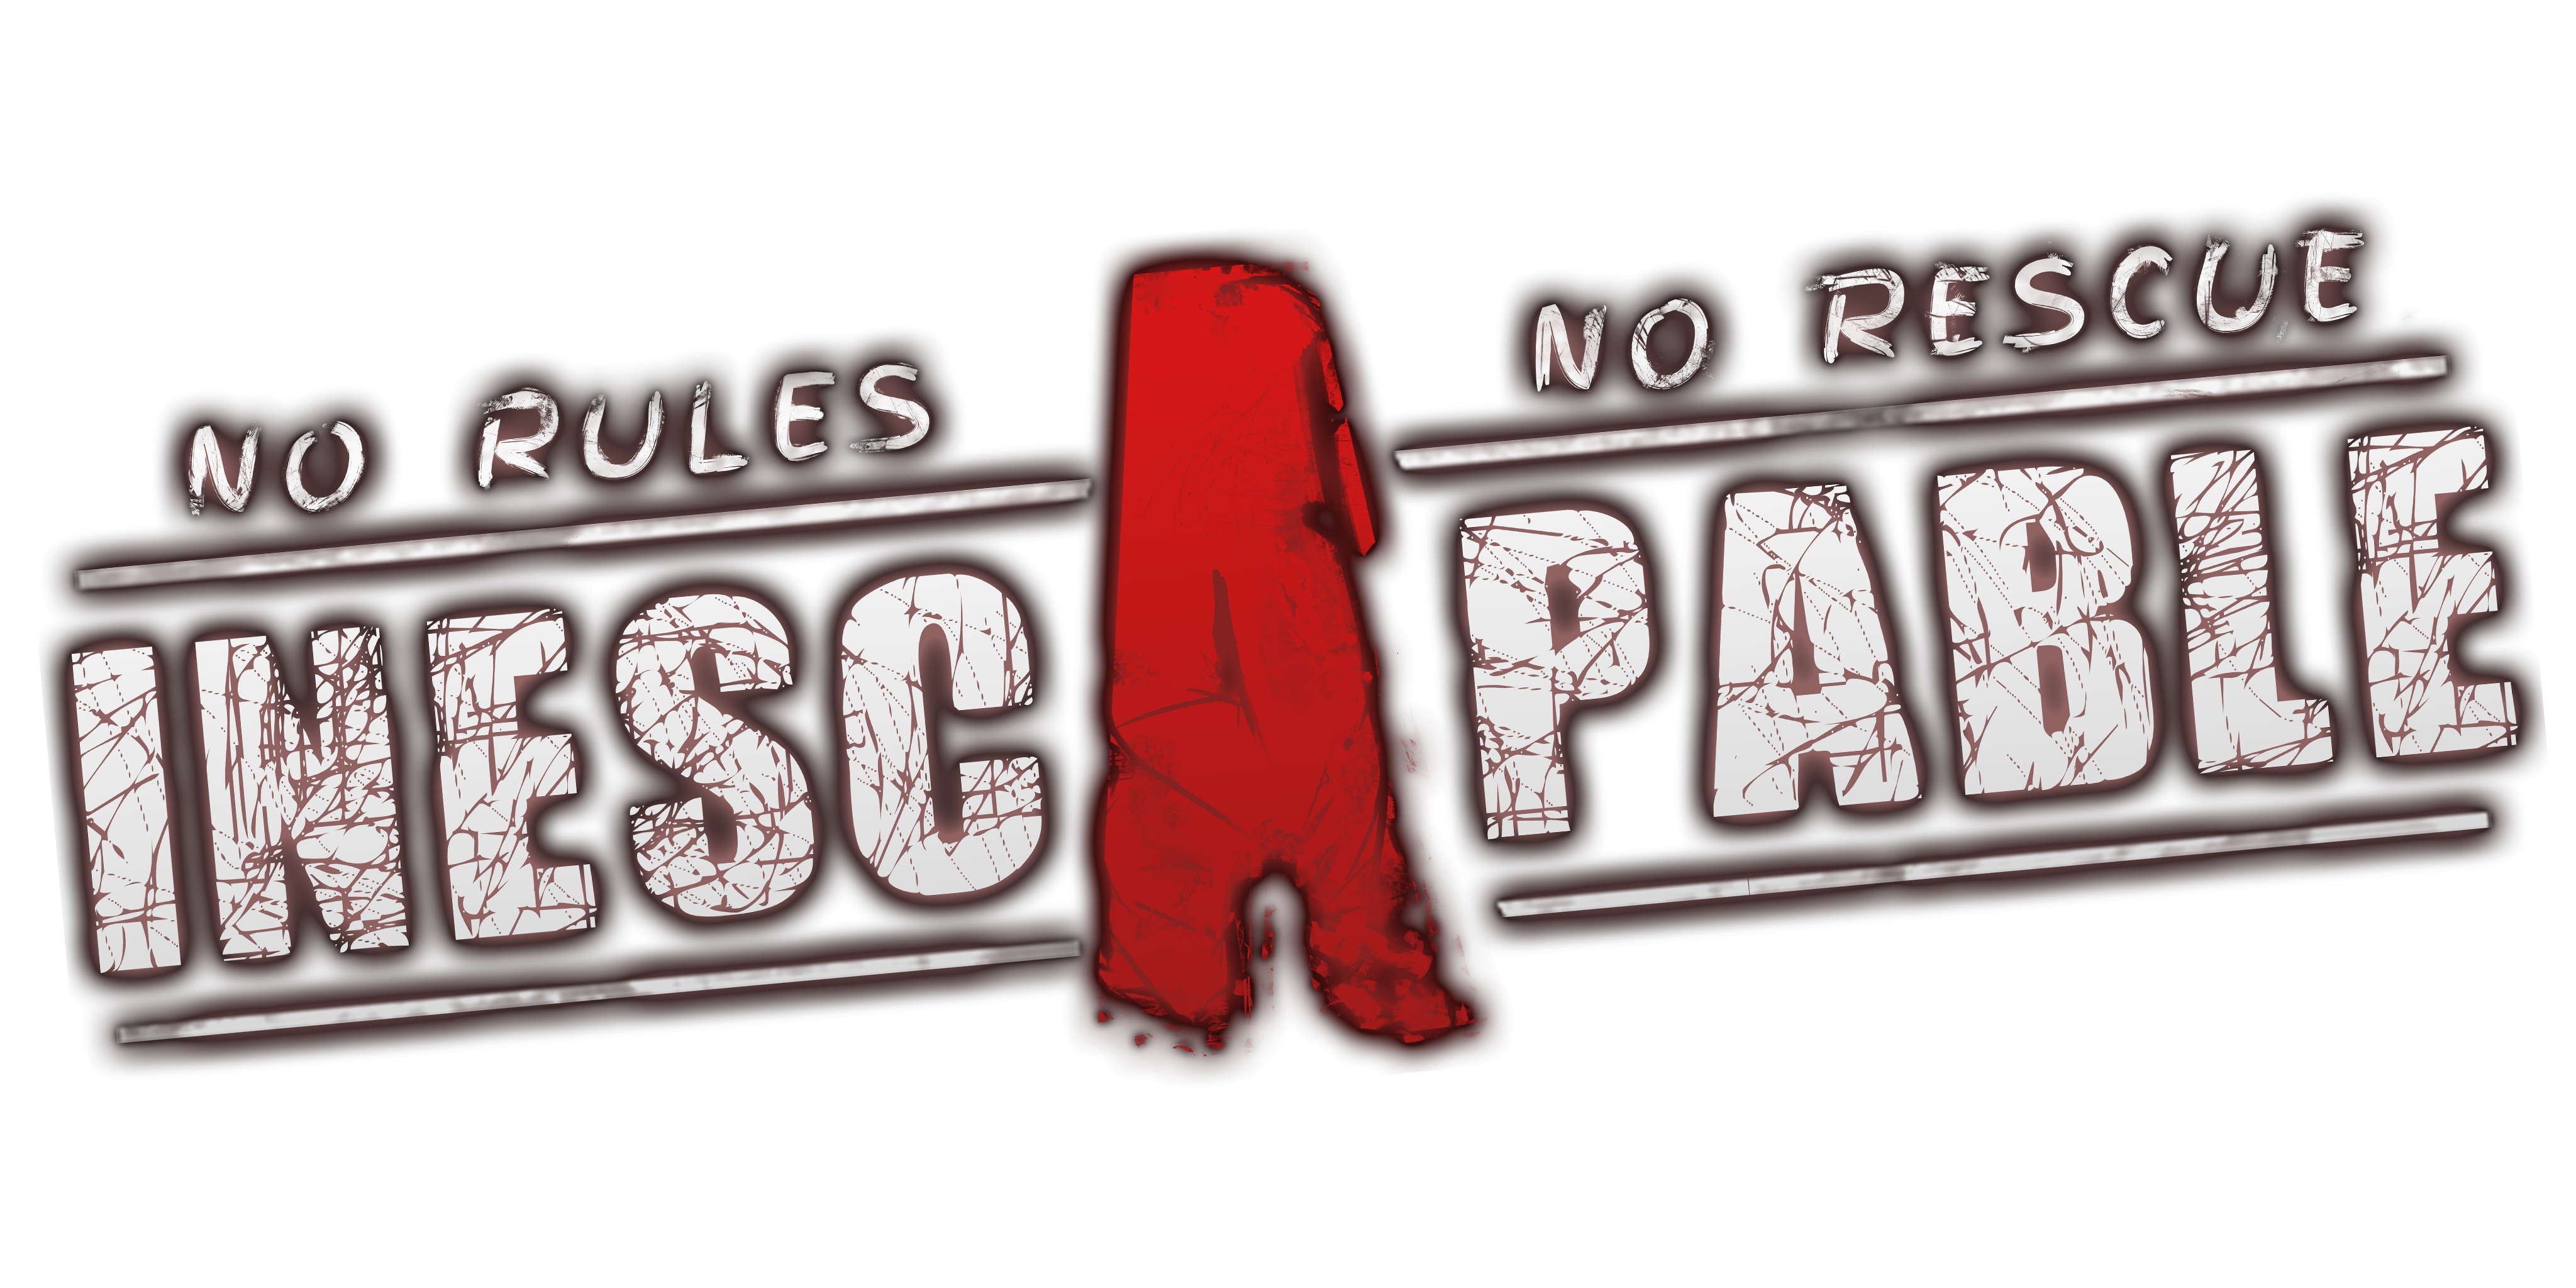 qhb-S2h- "Inescapable: No Rules, No Rescue" Available Now!